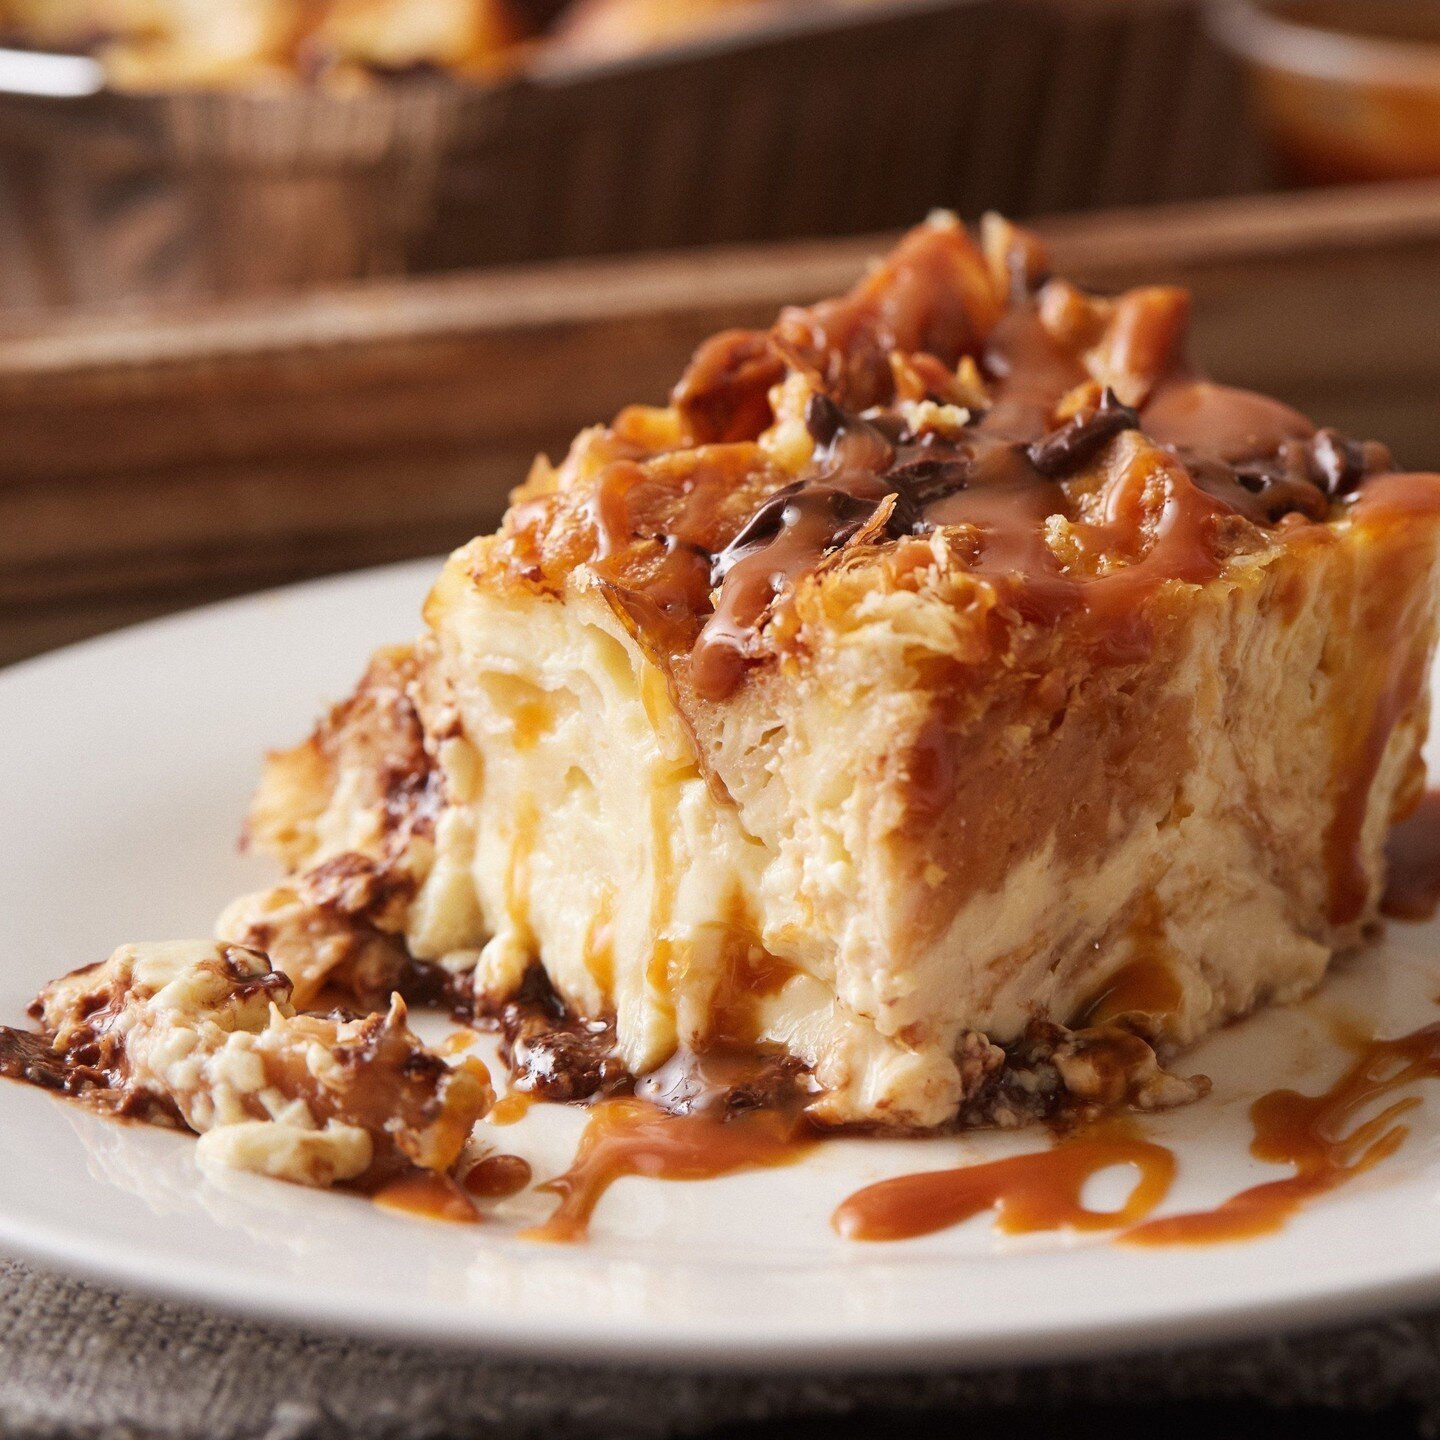 Whether you're hosting Easter brunch or dinner, our Chocolate Croissant Bread Pudding is sure to be a hit. This fan-favorite has six servings and is easy to heat up at home, making it a wonderful accompaniment to any meal. Call us at 314-858-1019 or 